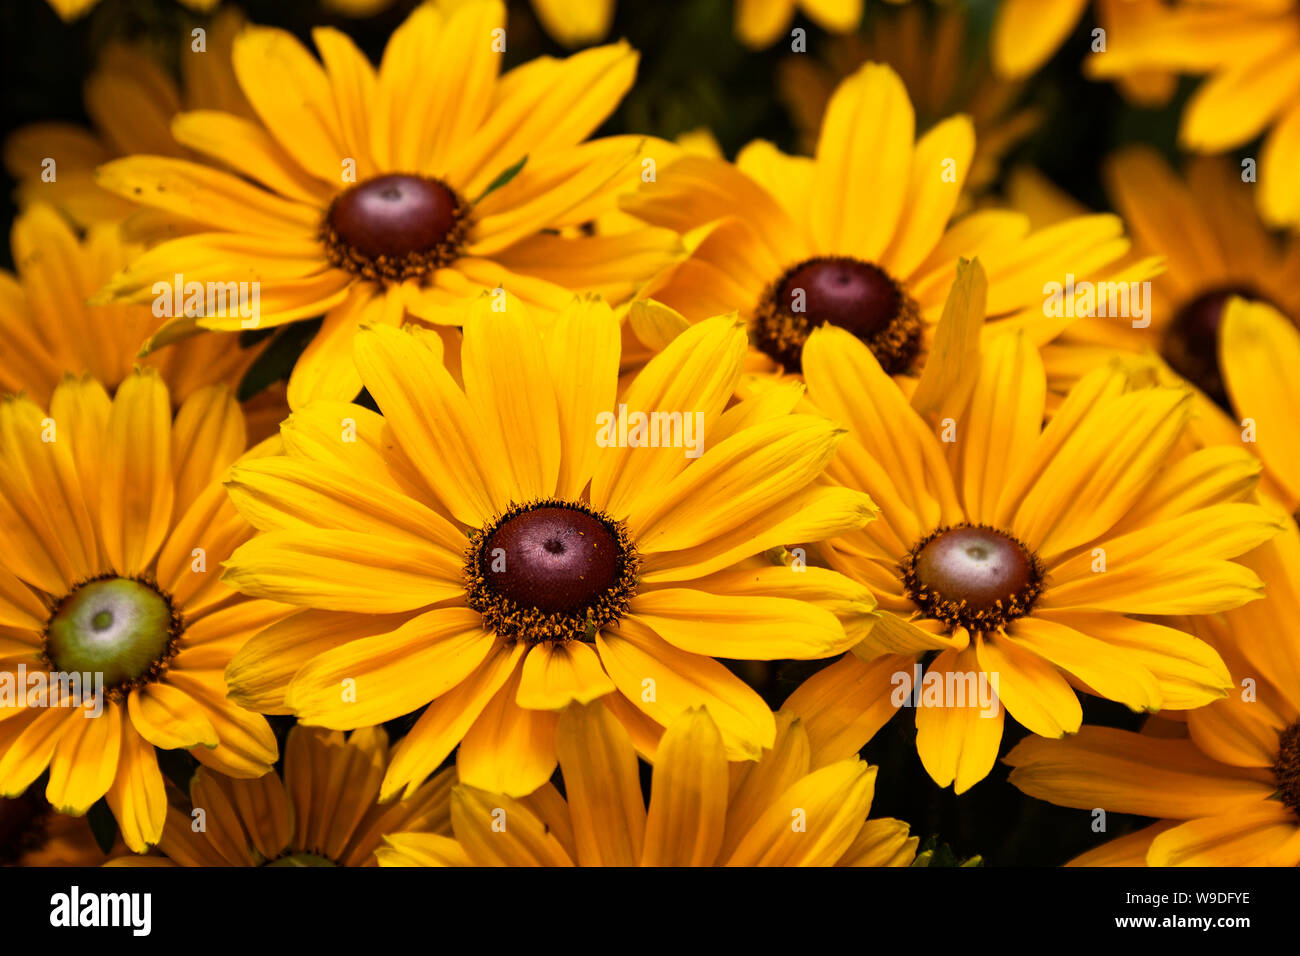 daisy-like flowers, yellow, smooth brown centers, cultivated flowers, bedding plant, PA; Pennsylvania; USA; summer; horizontal Stock Photo